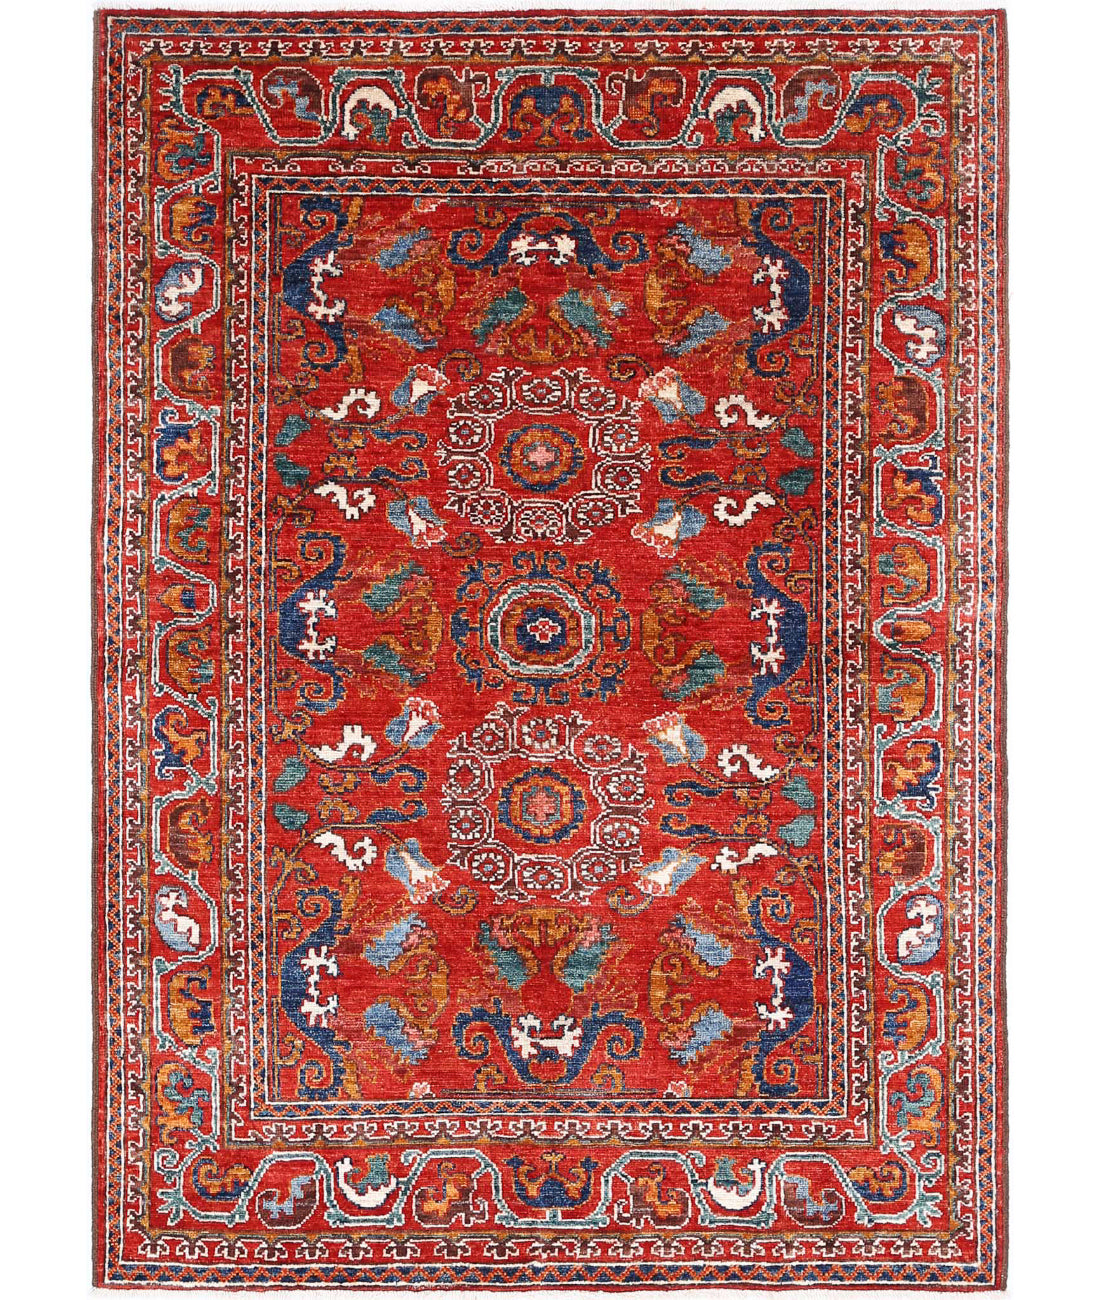 Hand Knotted Nomadic Caucasian Humna Wool Rug - 4'1'' x 5'10'' 4'1'' x 5'10'' (123 X 175) / Red / N/A